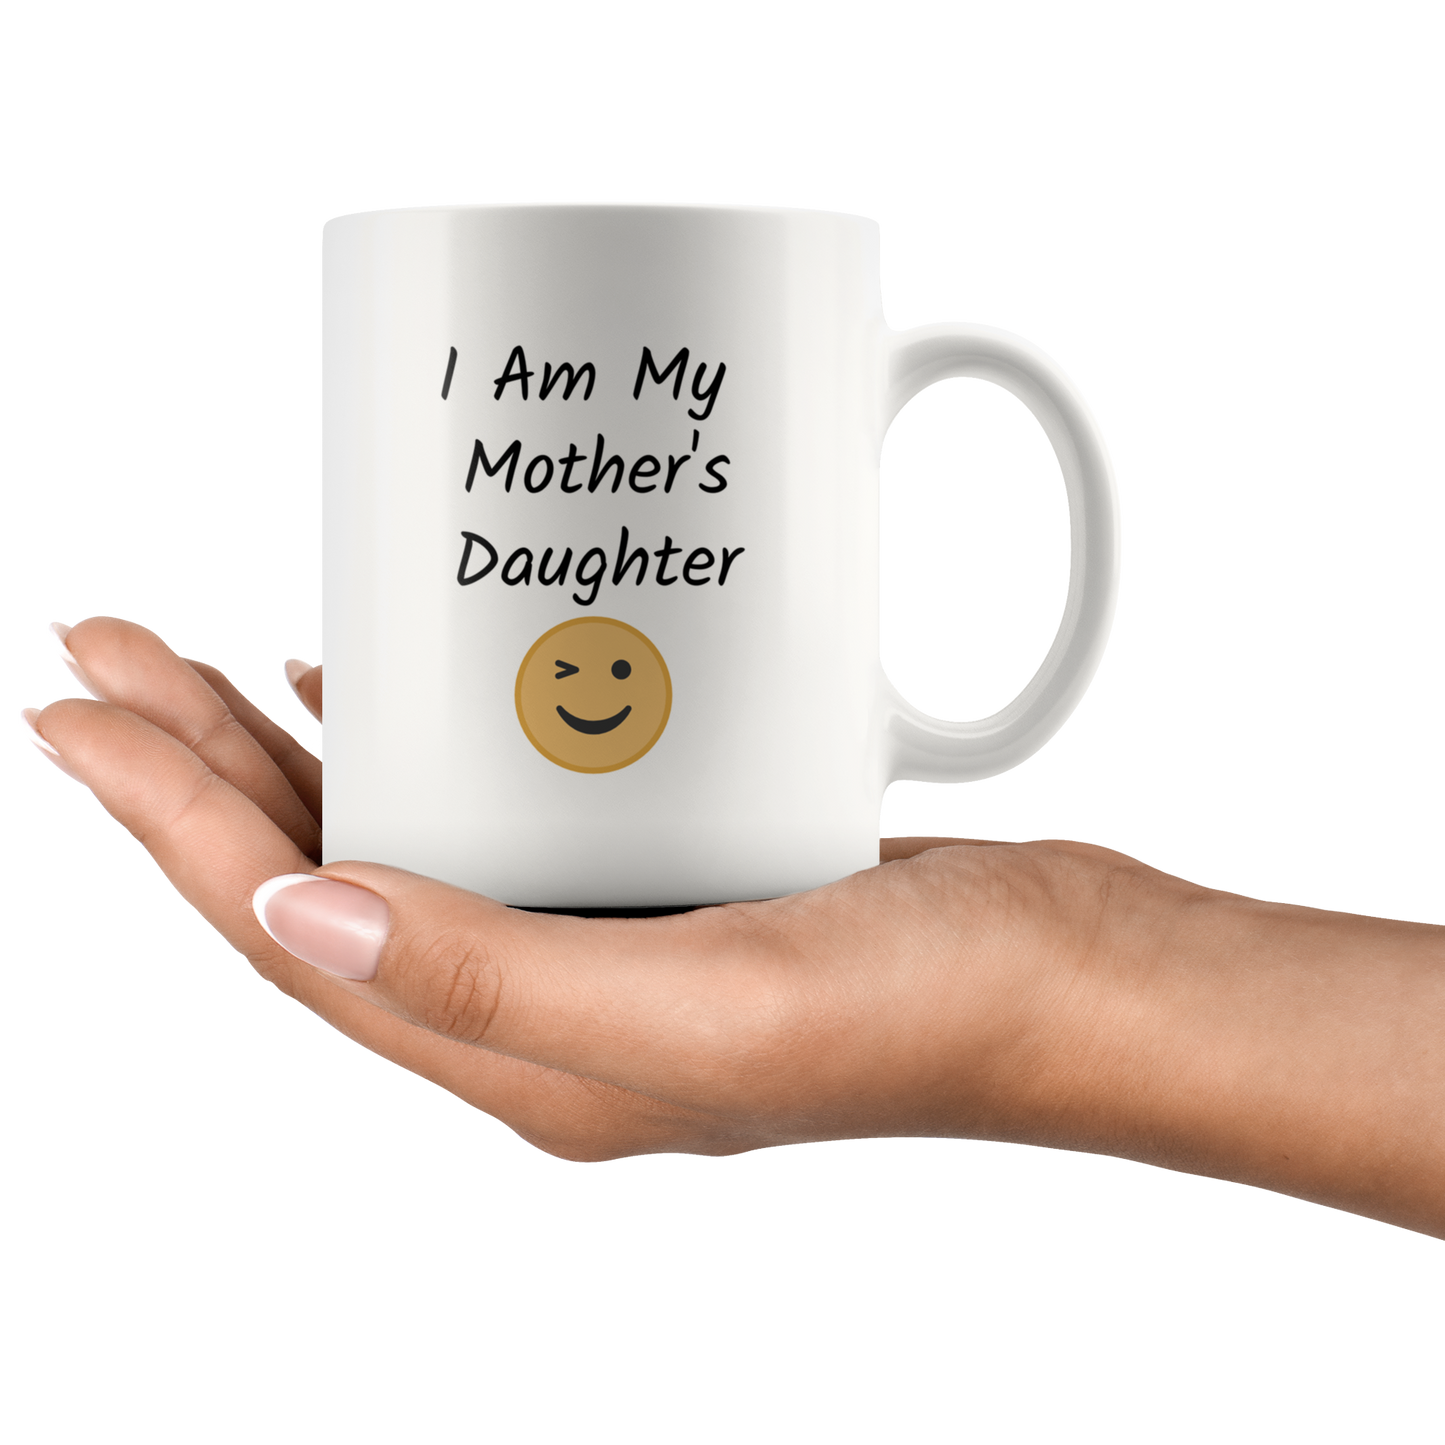 I am My Mother's Daughter Funny Coffee Mug Gift for Mom and Daughter Coffee lovers